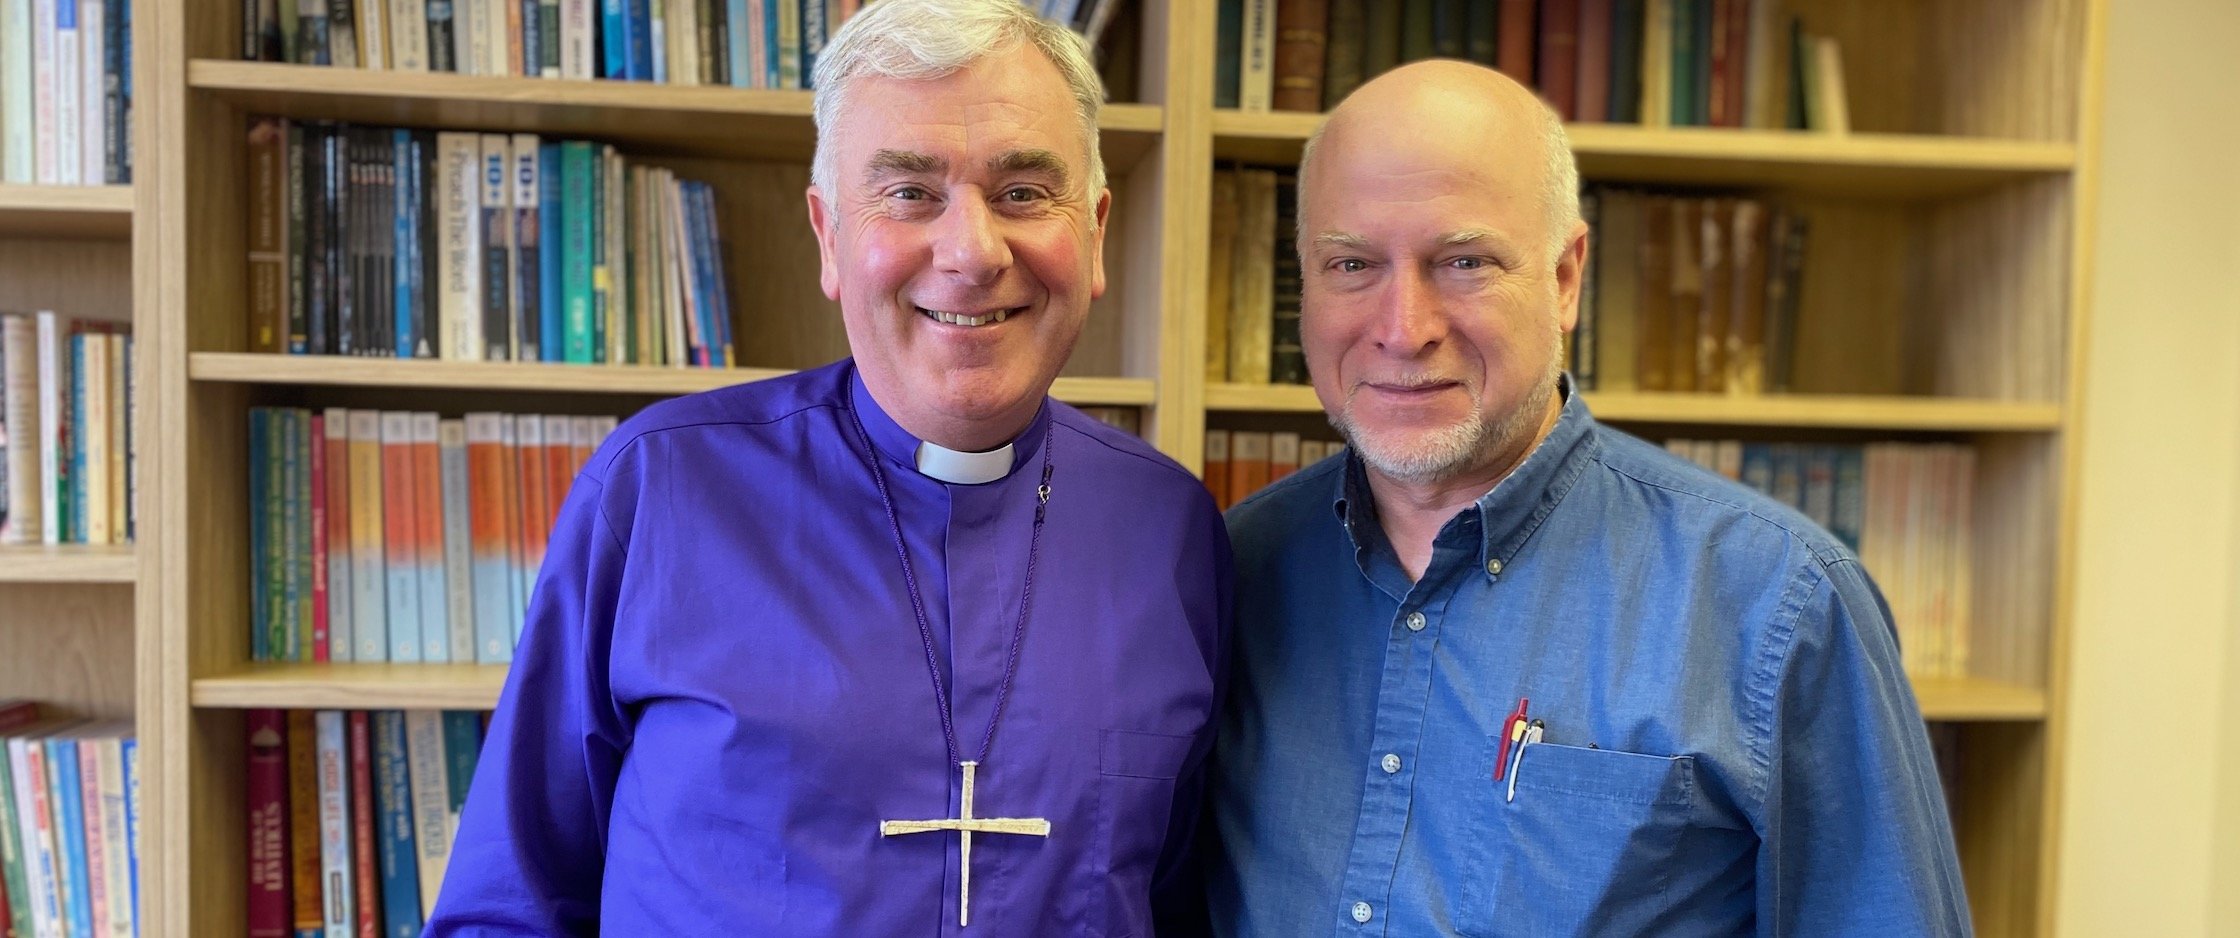 Bishop Bill Love (right) pictured in January with Bishop David McClay.